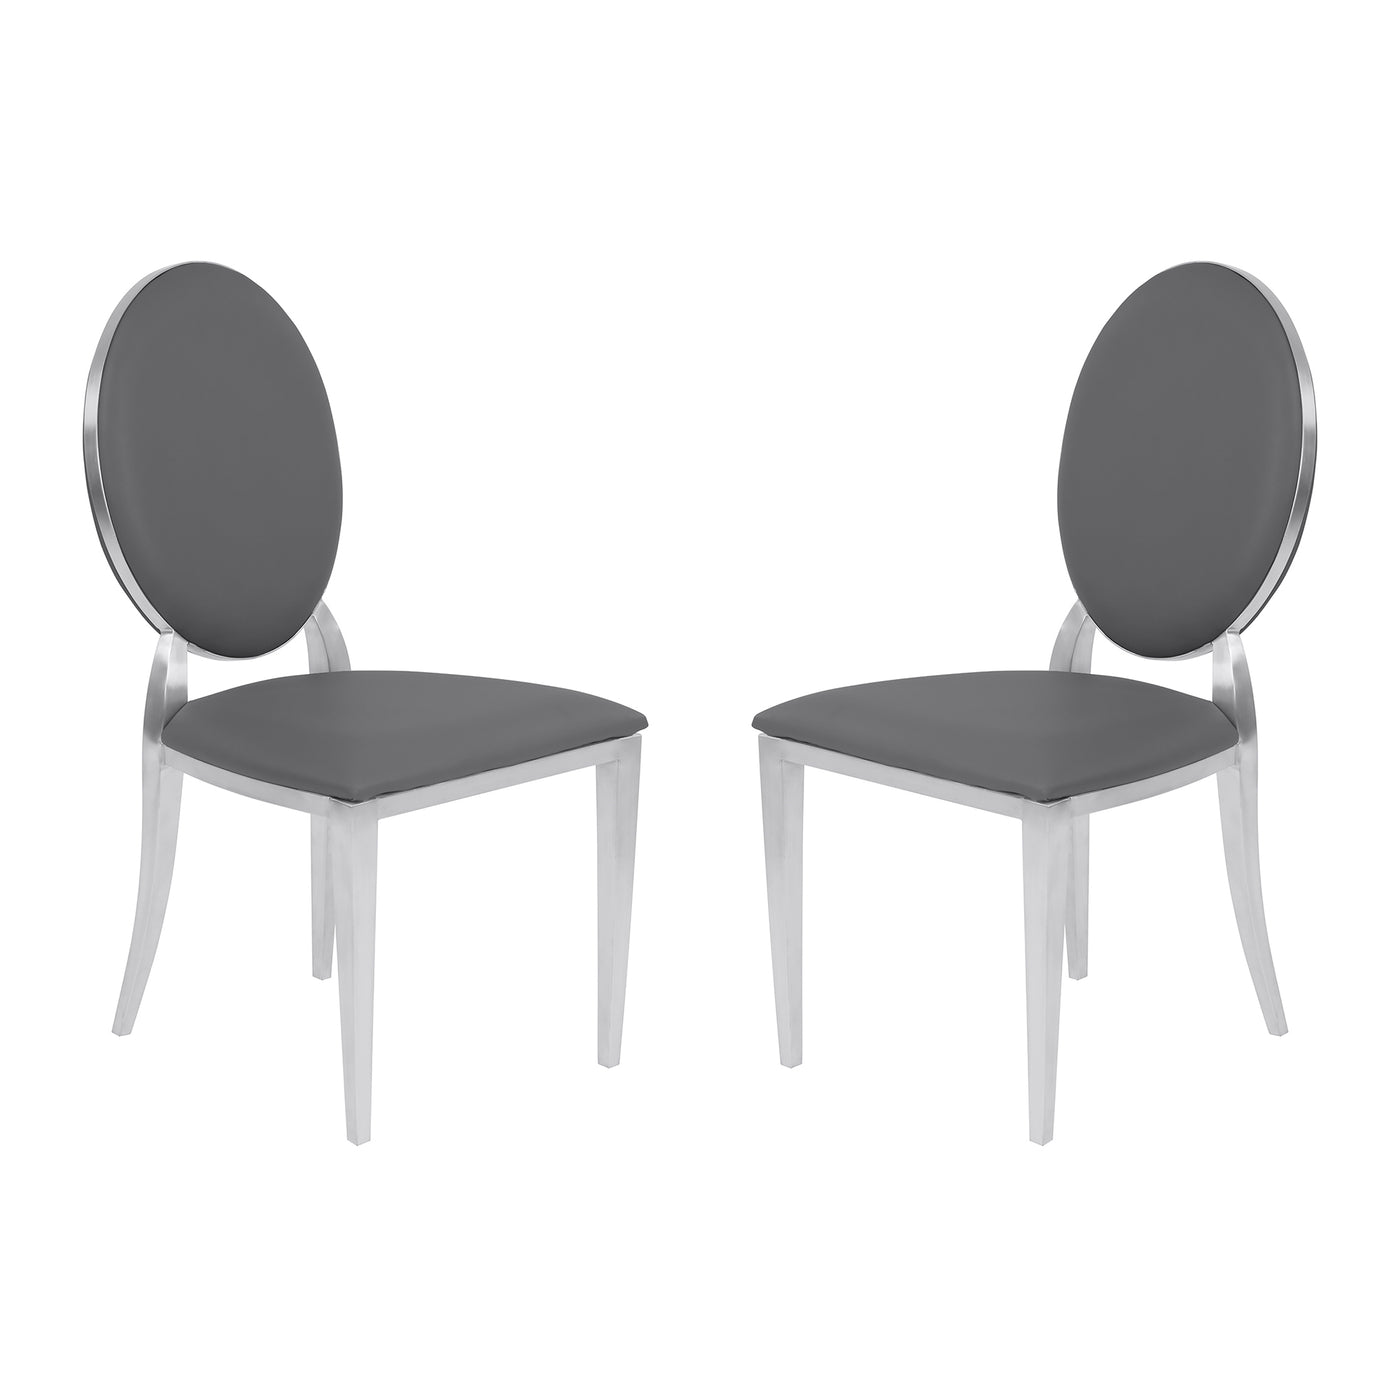 Cielo Dining Chair Set of 2